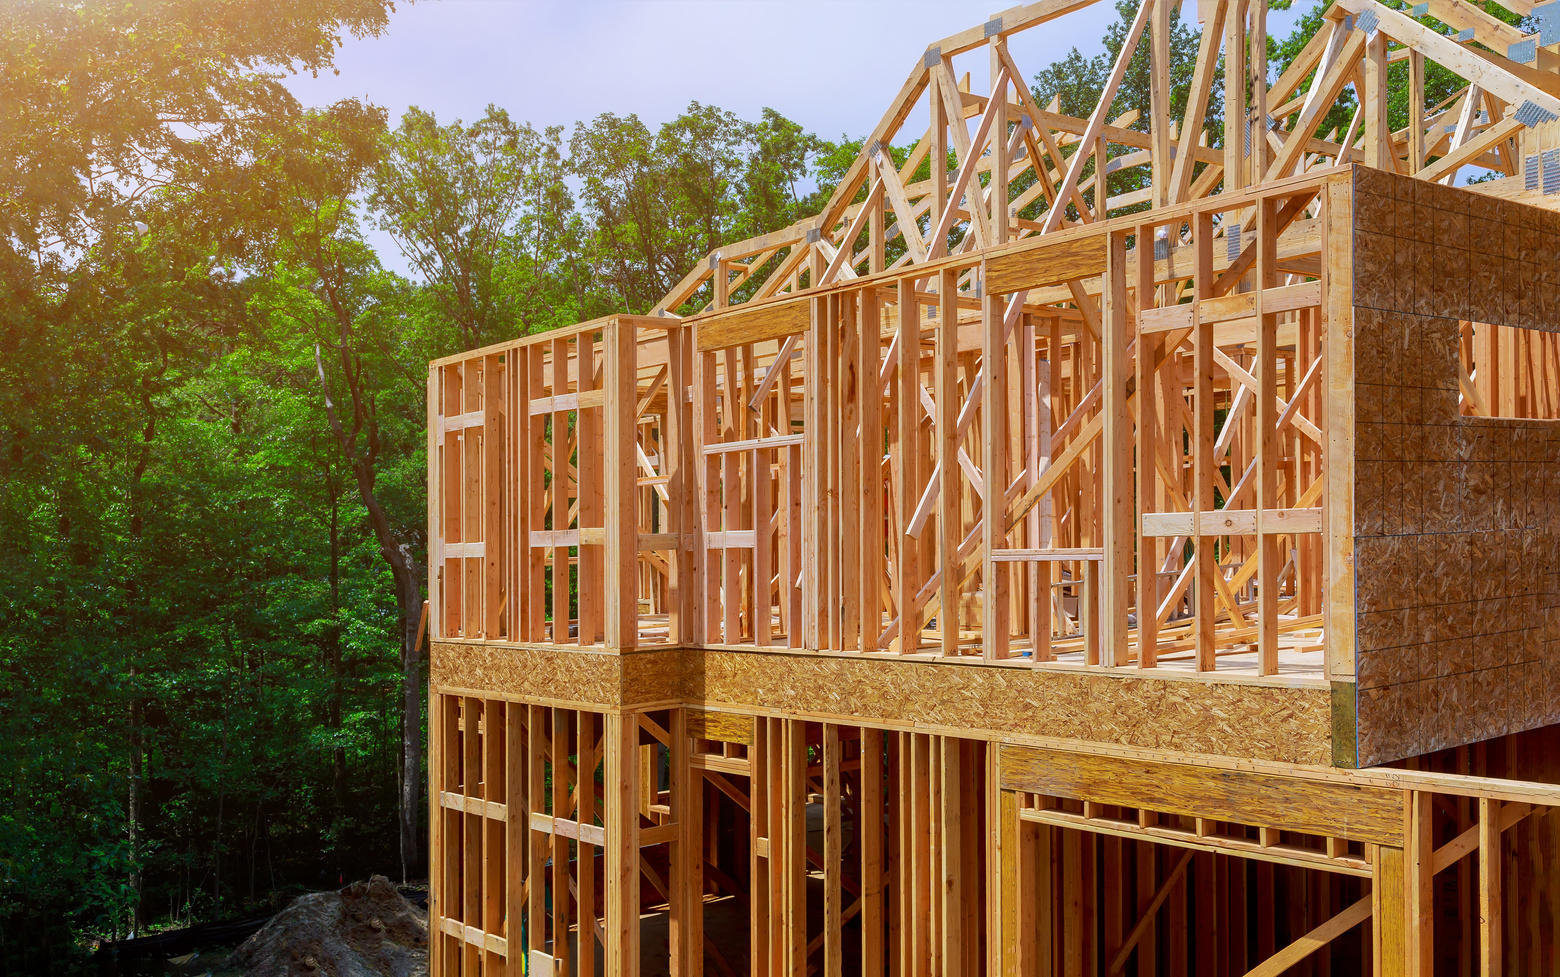 Building construction, wood framing structure at new property development